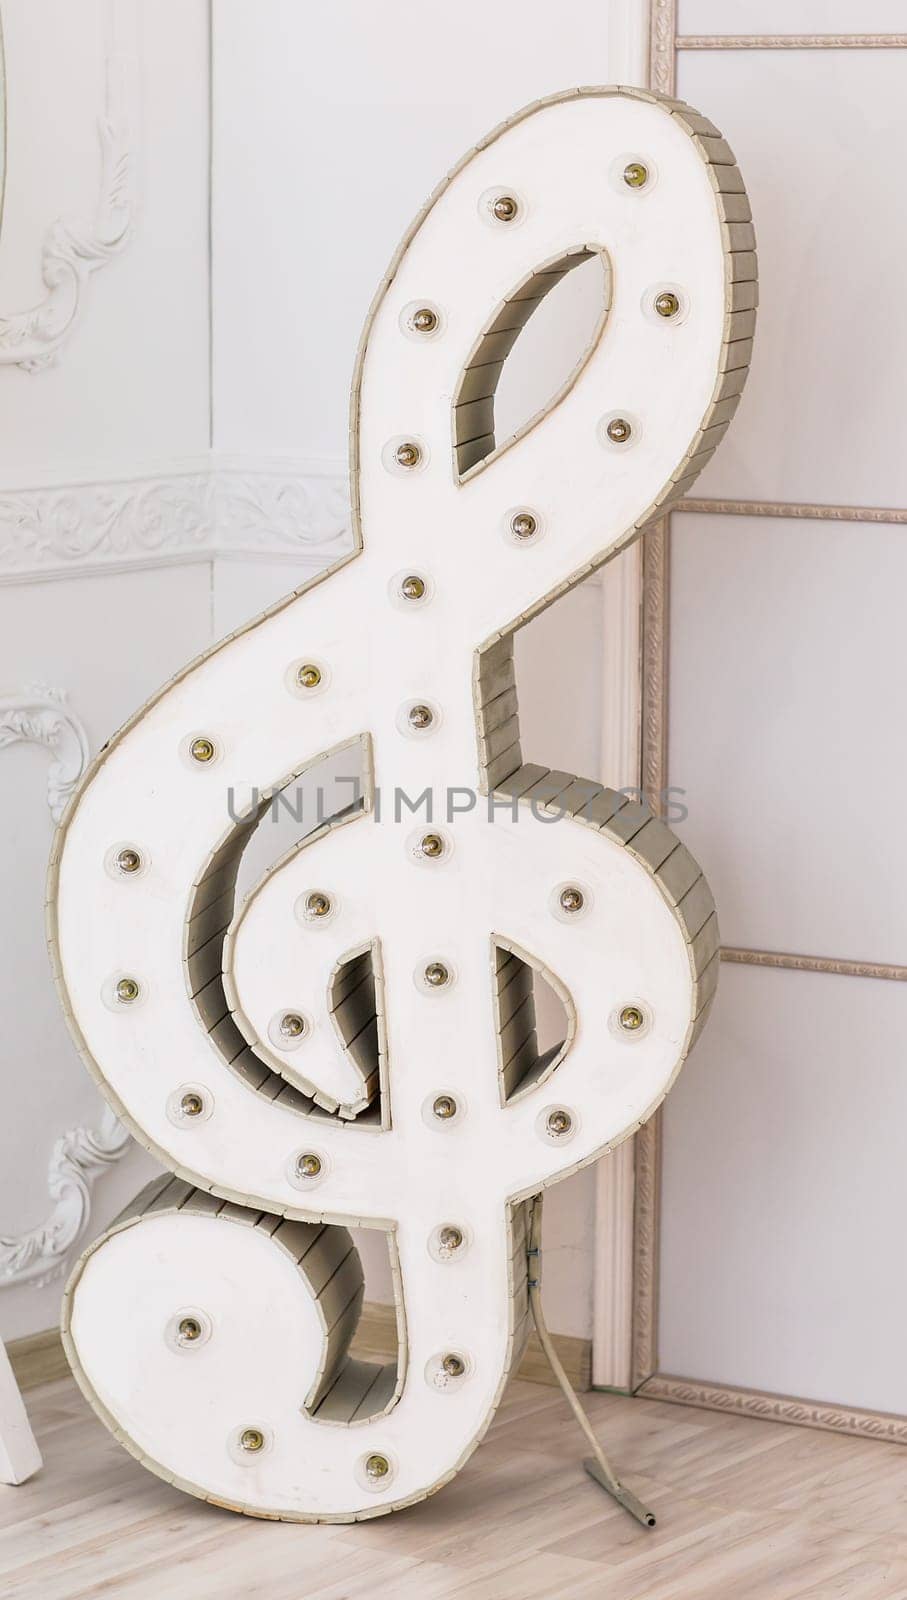 Close-up of treble clef by Satura86